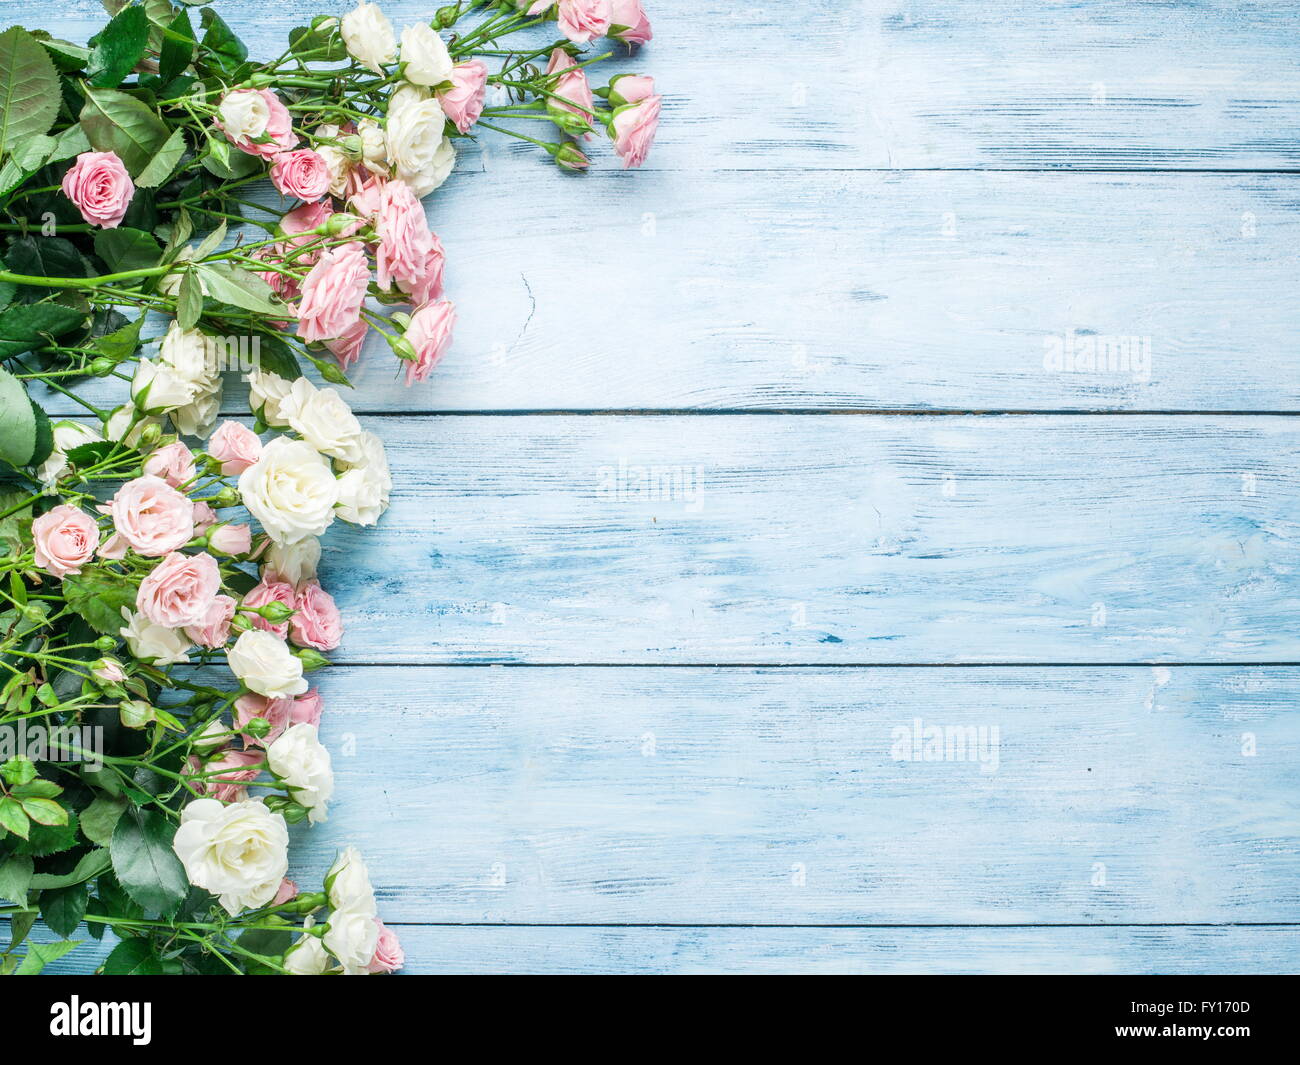 Delicate fresh roses on the blue wooden background. Stock Photo